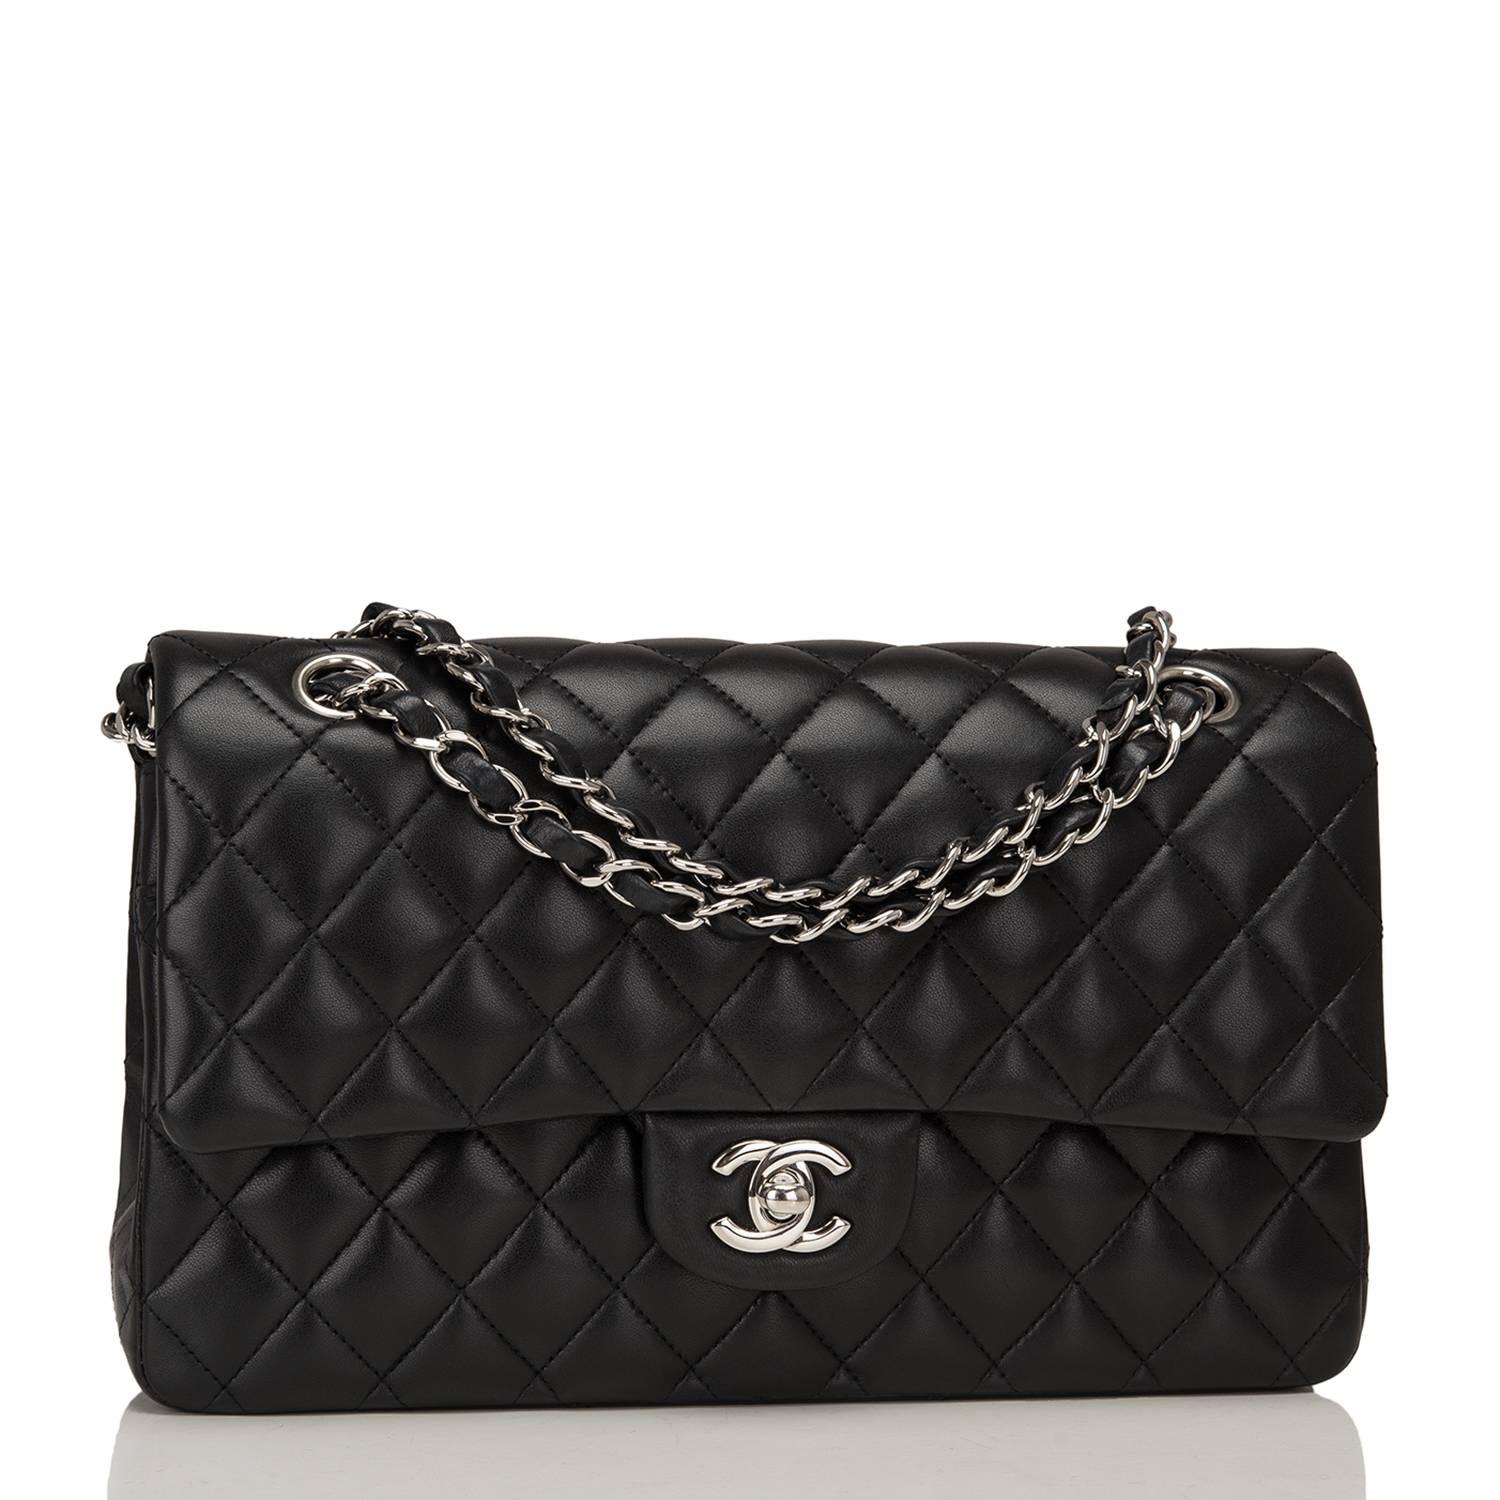 Chanel Medium Classic double flap bag of black lambskin leather with silver tone hardware.

This bag features a front flap with signature CC turnlock closure, a half moon back pocket, and an adjustable interwoven silver tone chain link with black